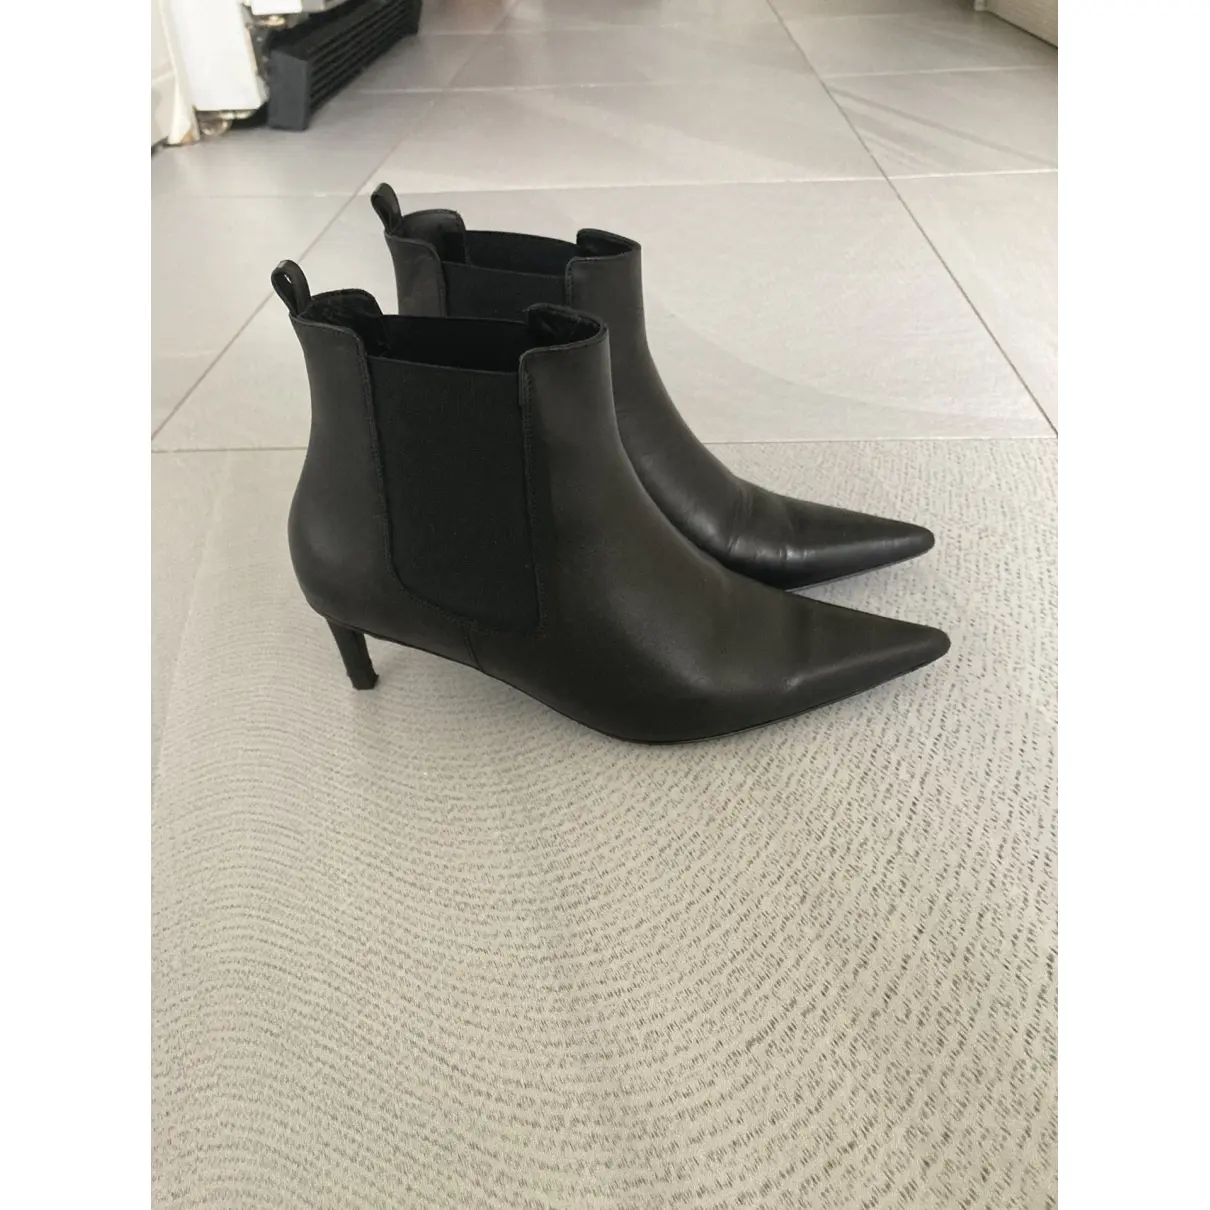 Buy Anine Bing Leather ankle boots online